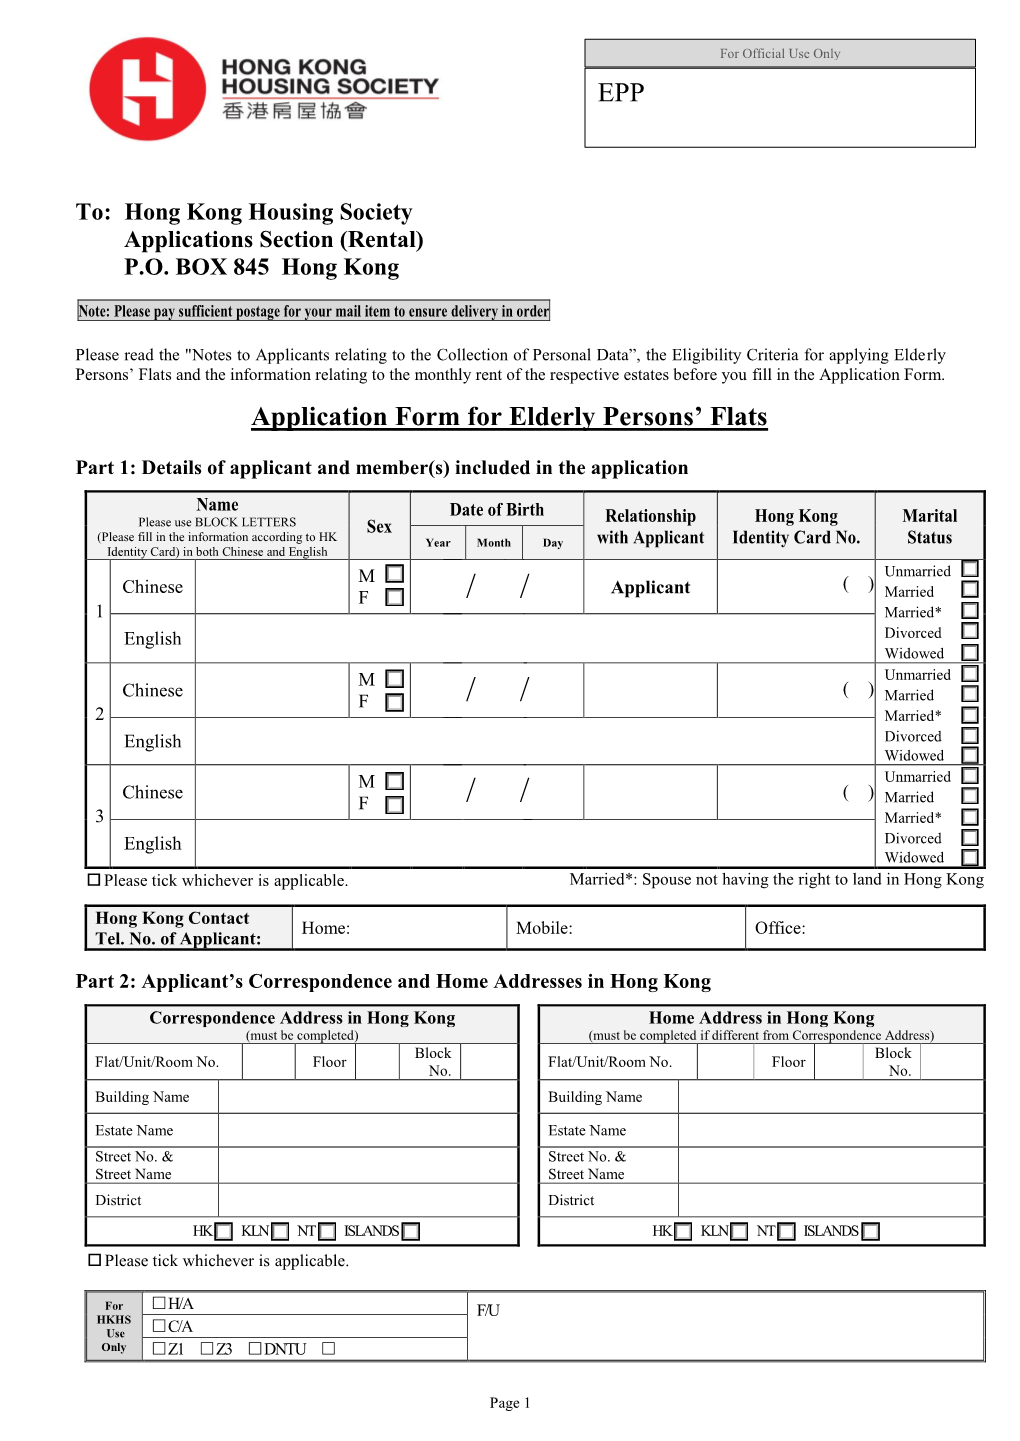 Application Form for Elderly Persons' Flats